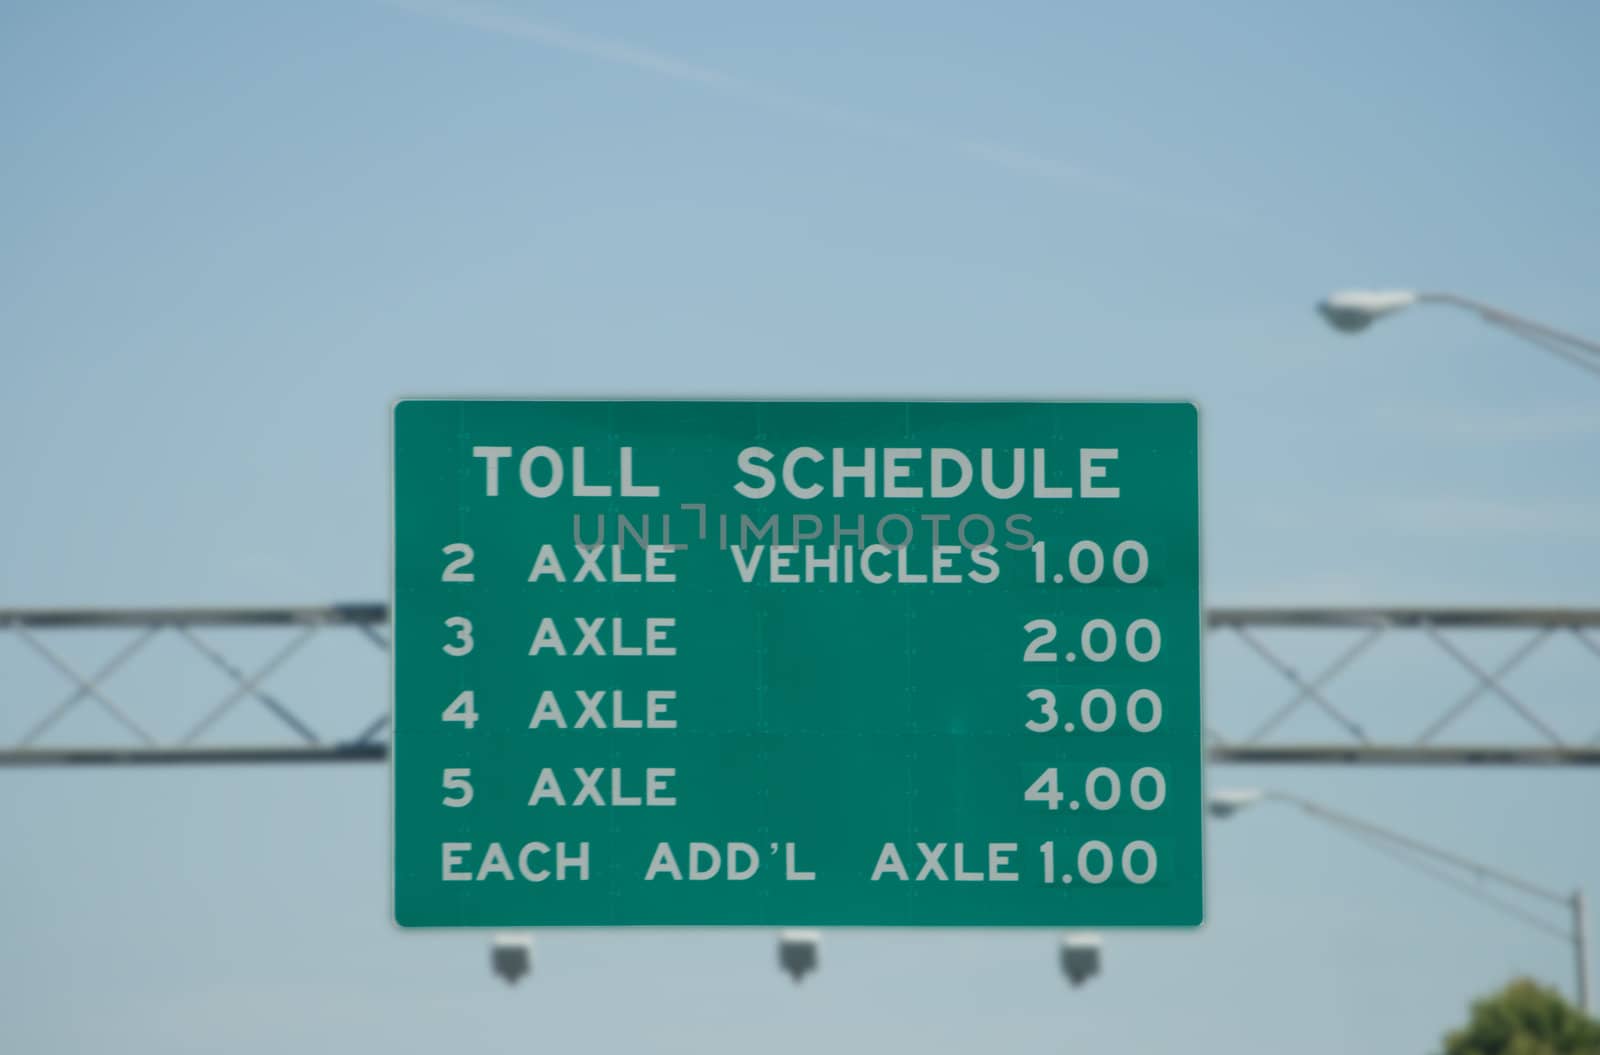 Toll Road Fee Schedule Sign captured along an interstate highway approaching a turnpike payment plaza. Prices are shown by dollar amount per 2 3 4 or 5 axles.
